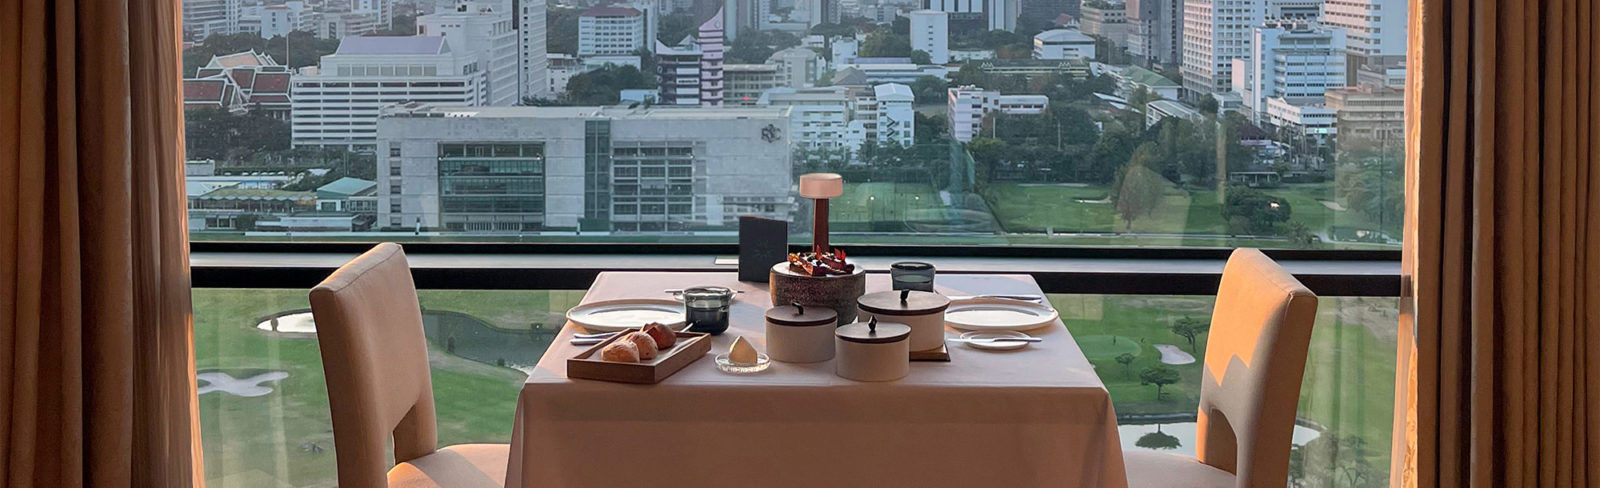 Igniv Bangkok is Back with a Dazzling ‘Igniv with a View’ Dining Experience